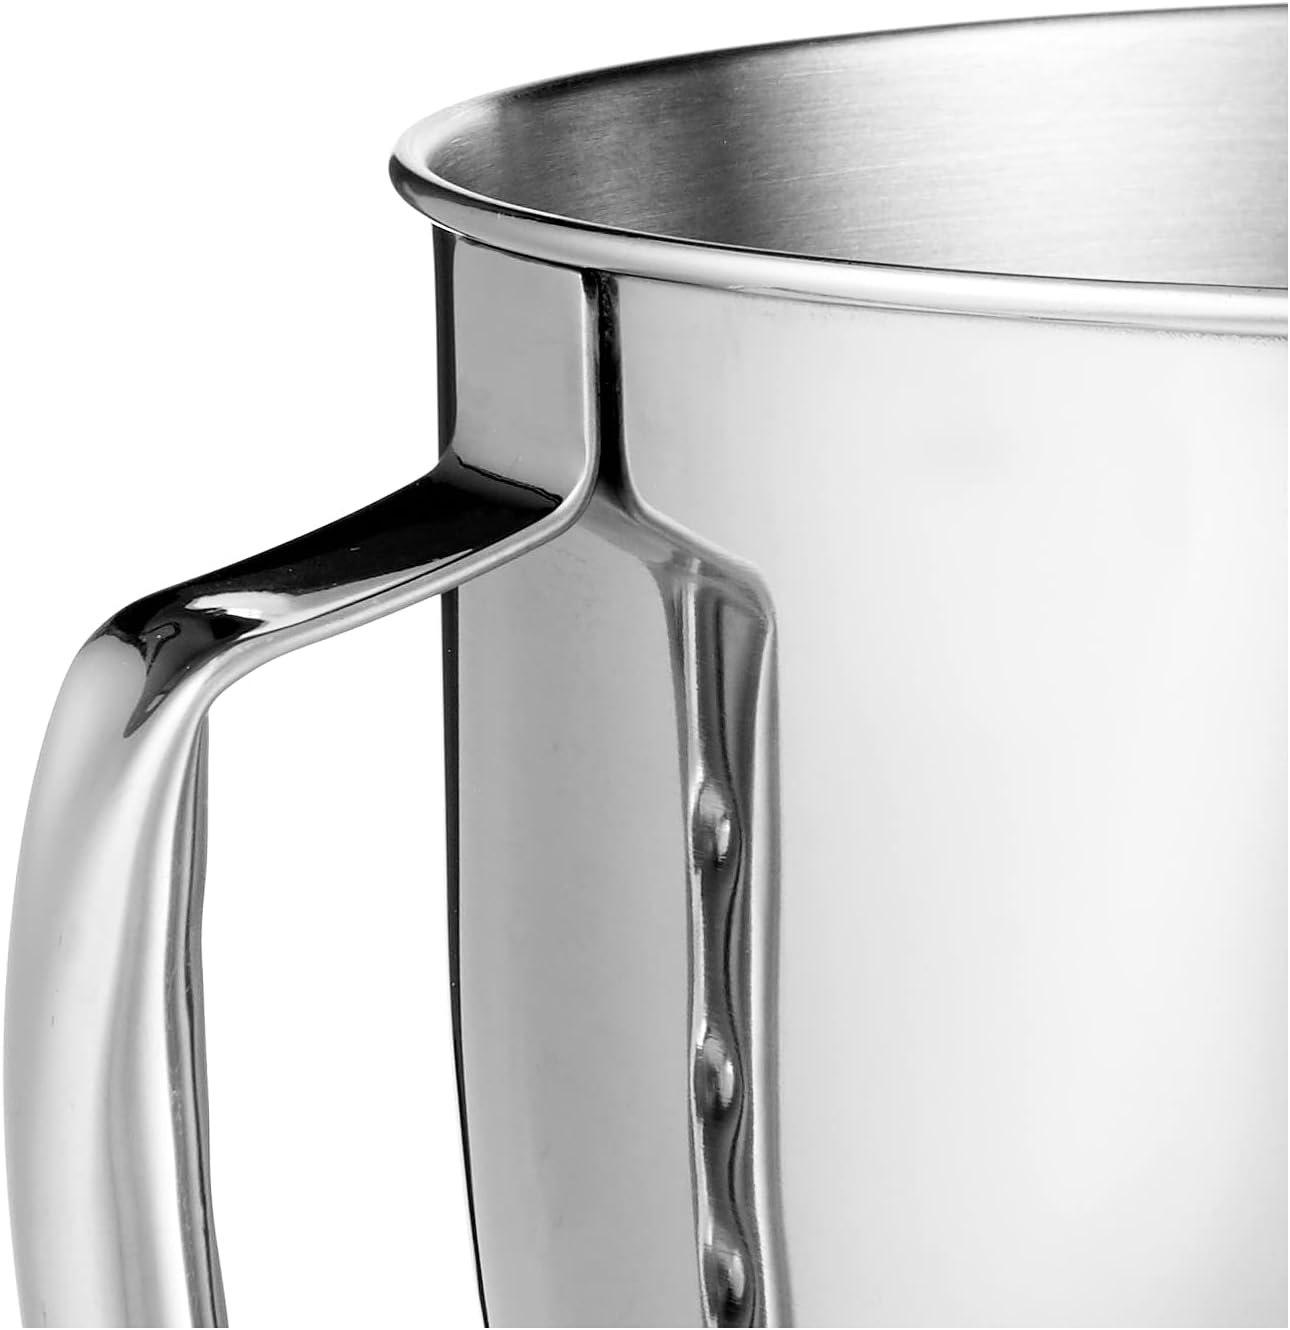 Cuisinart 5.5-Qt. Stainless Steel Mixing Bowl (SM-50MB)